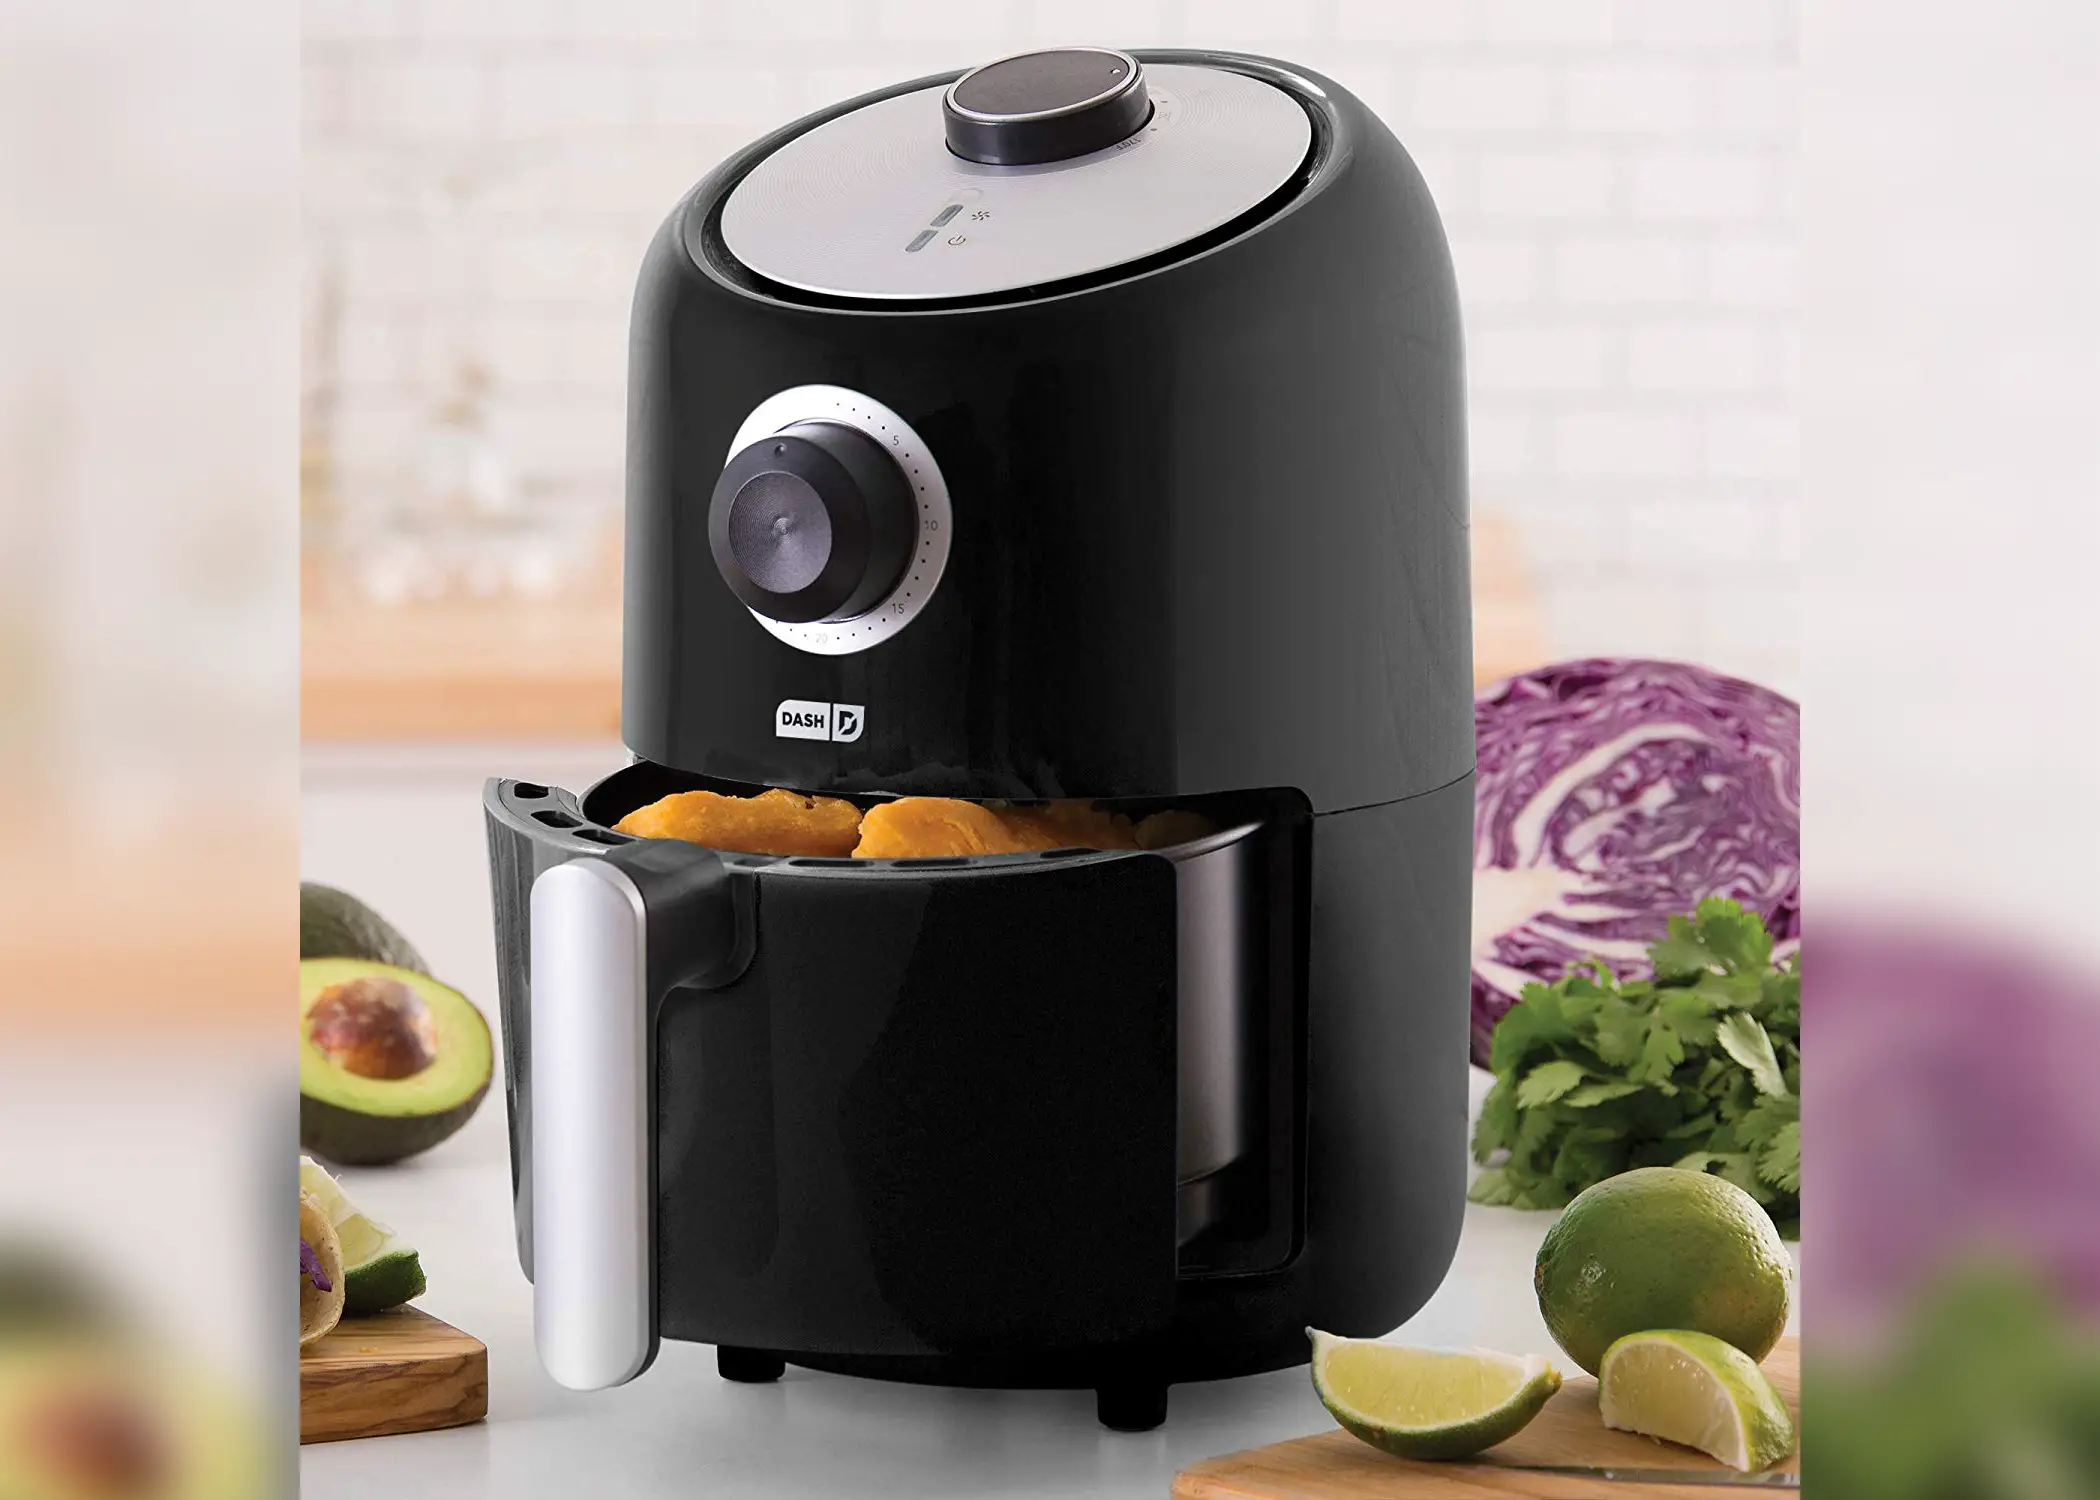 Dashs popular compact air fryer is down to $46 in this ...